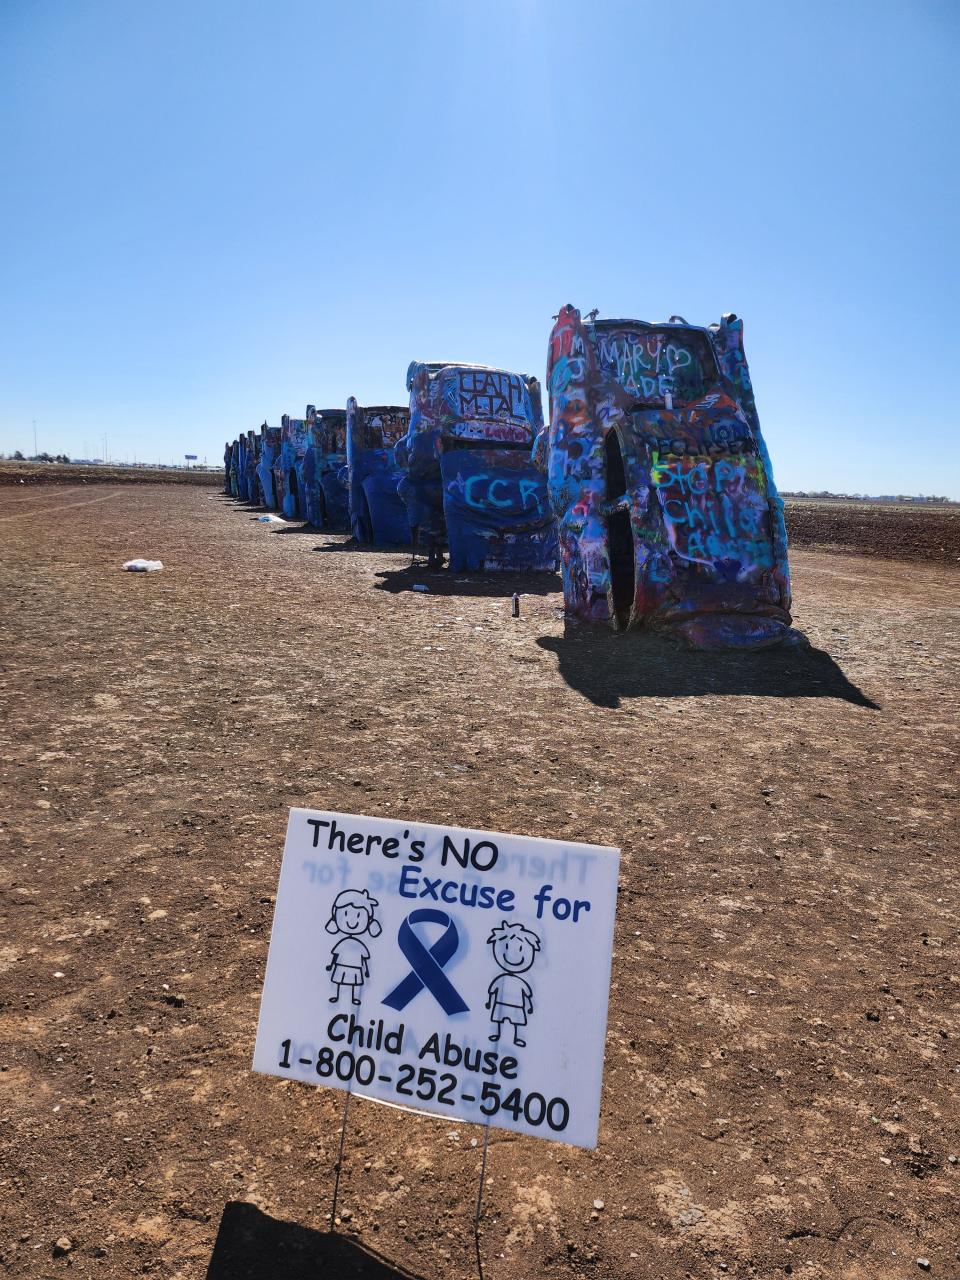 Cadillac Ranch goes blue as the Texas Department of Family Protective Services in collaboration with Saint Francis Ministries paint the local monument in honor of national Child Abuse Prevention month.